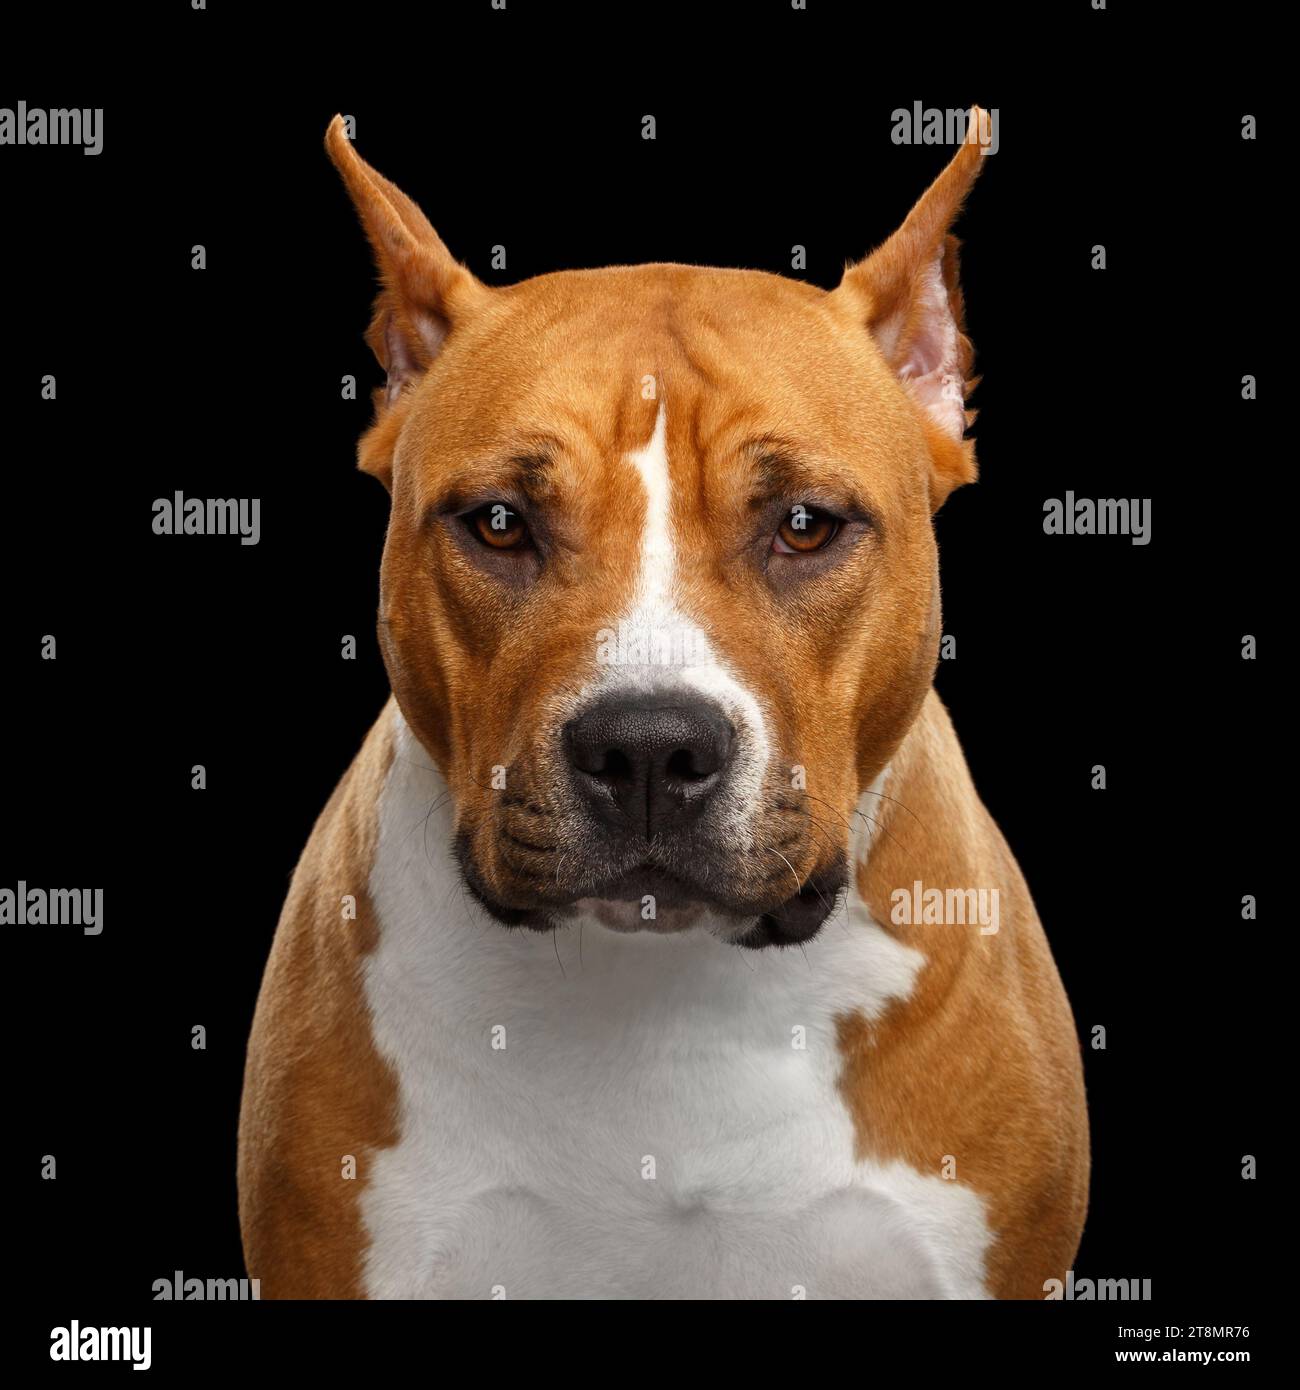 Portrait of Brown American Staffordshire Terrier Dog Looking at camera Seriously Isolated on Black Background Stock Photo